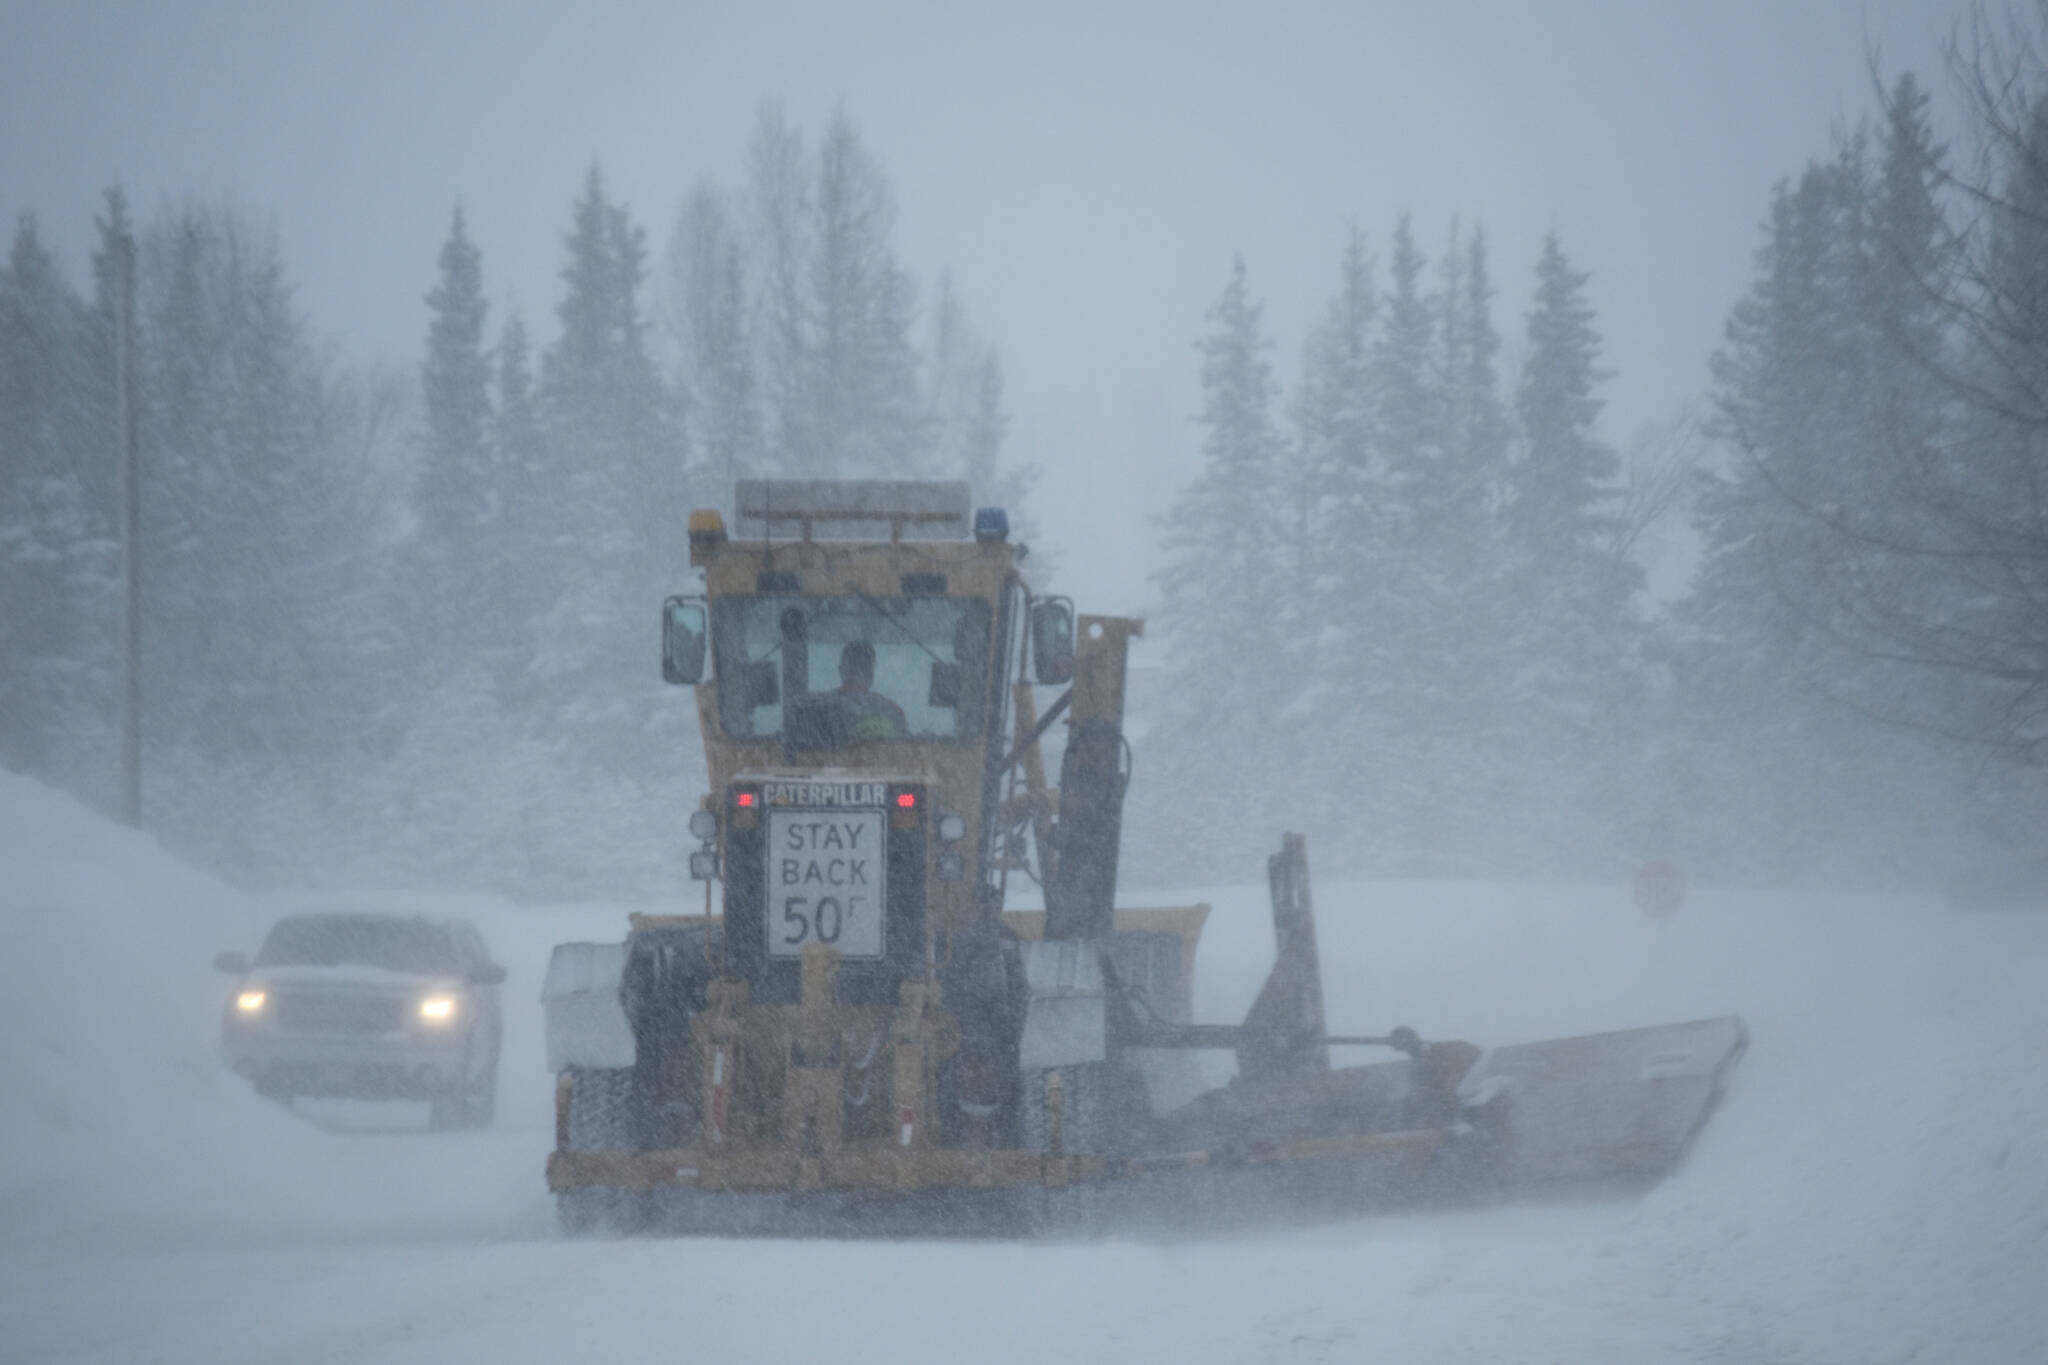 A grader moves down First Avenue in Kenai, Alaska, during a snow storm on Tuesday, Feb. 28, 2023. (Jake Dye/Peninsula Clarion)